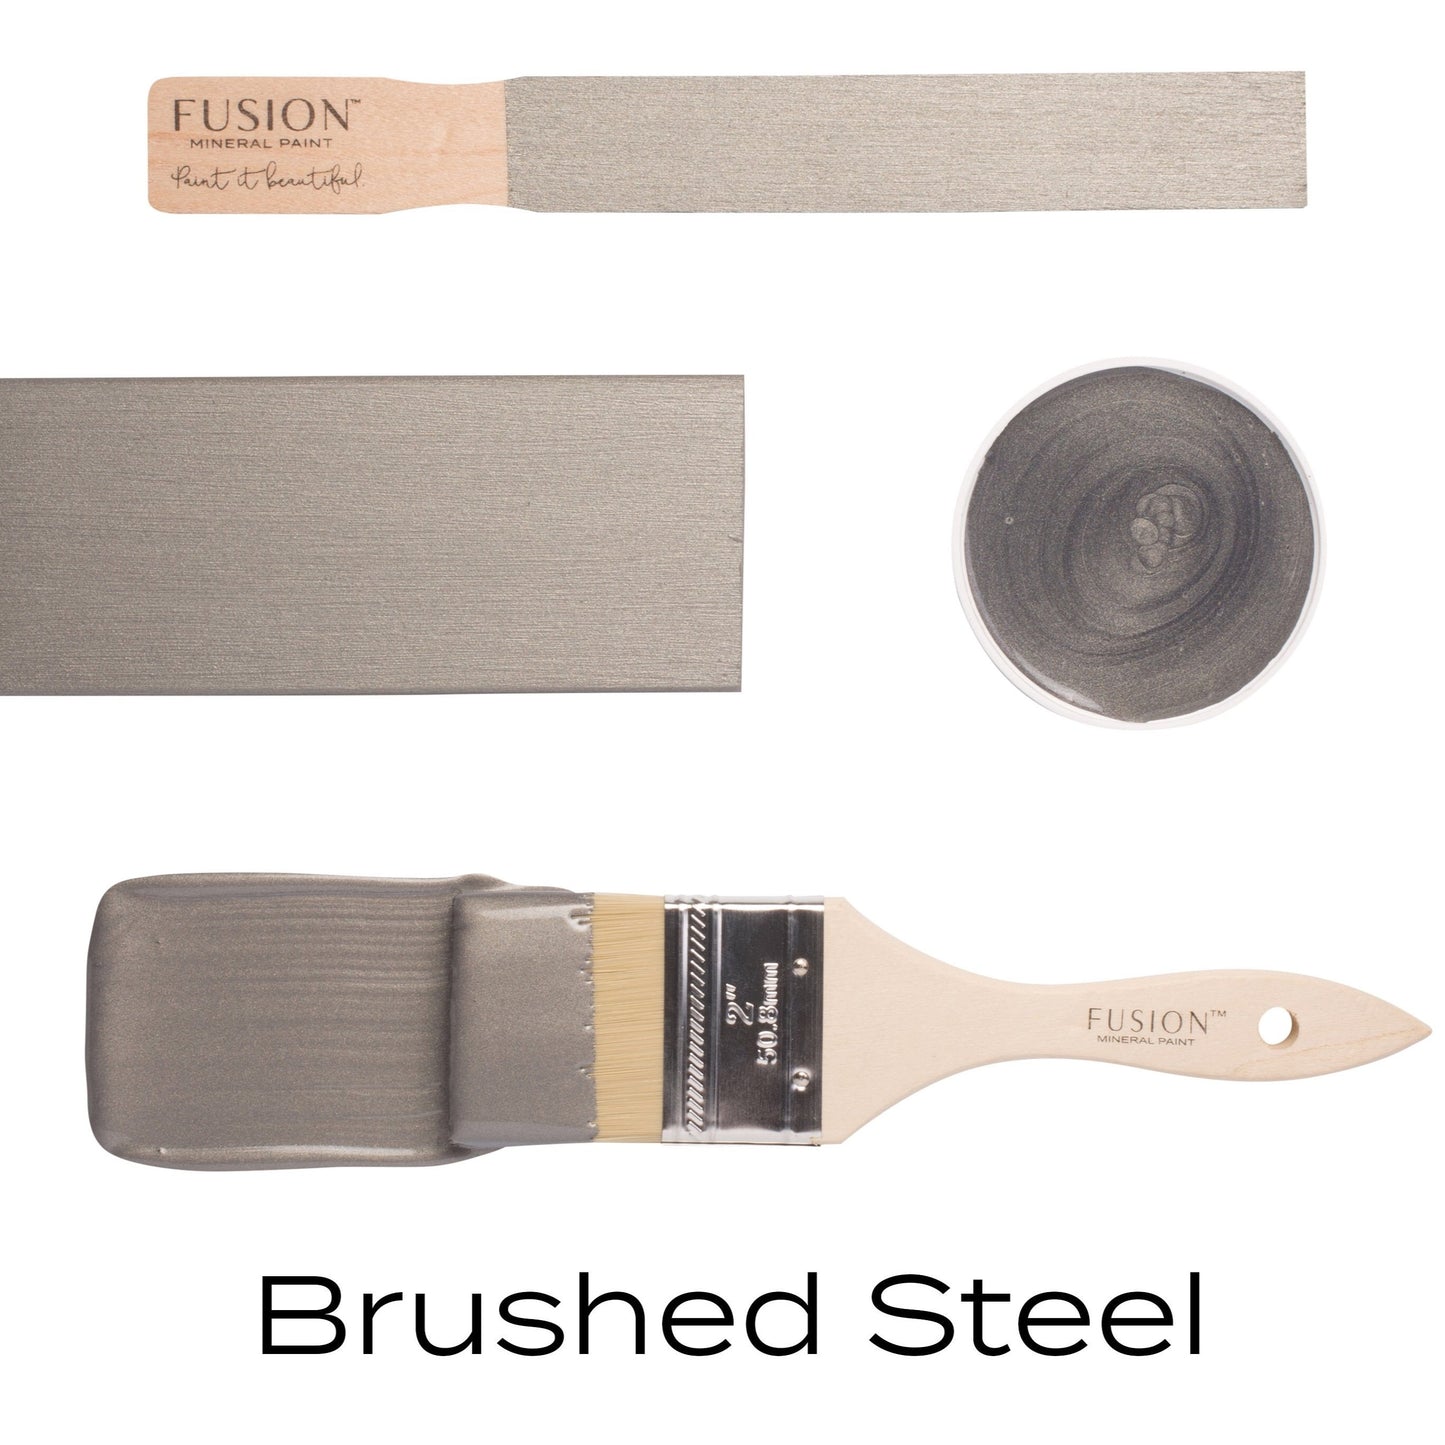 Brushed Steel Metallic by Fusion